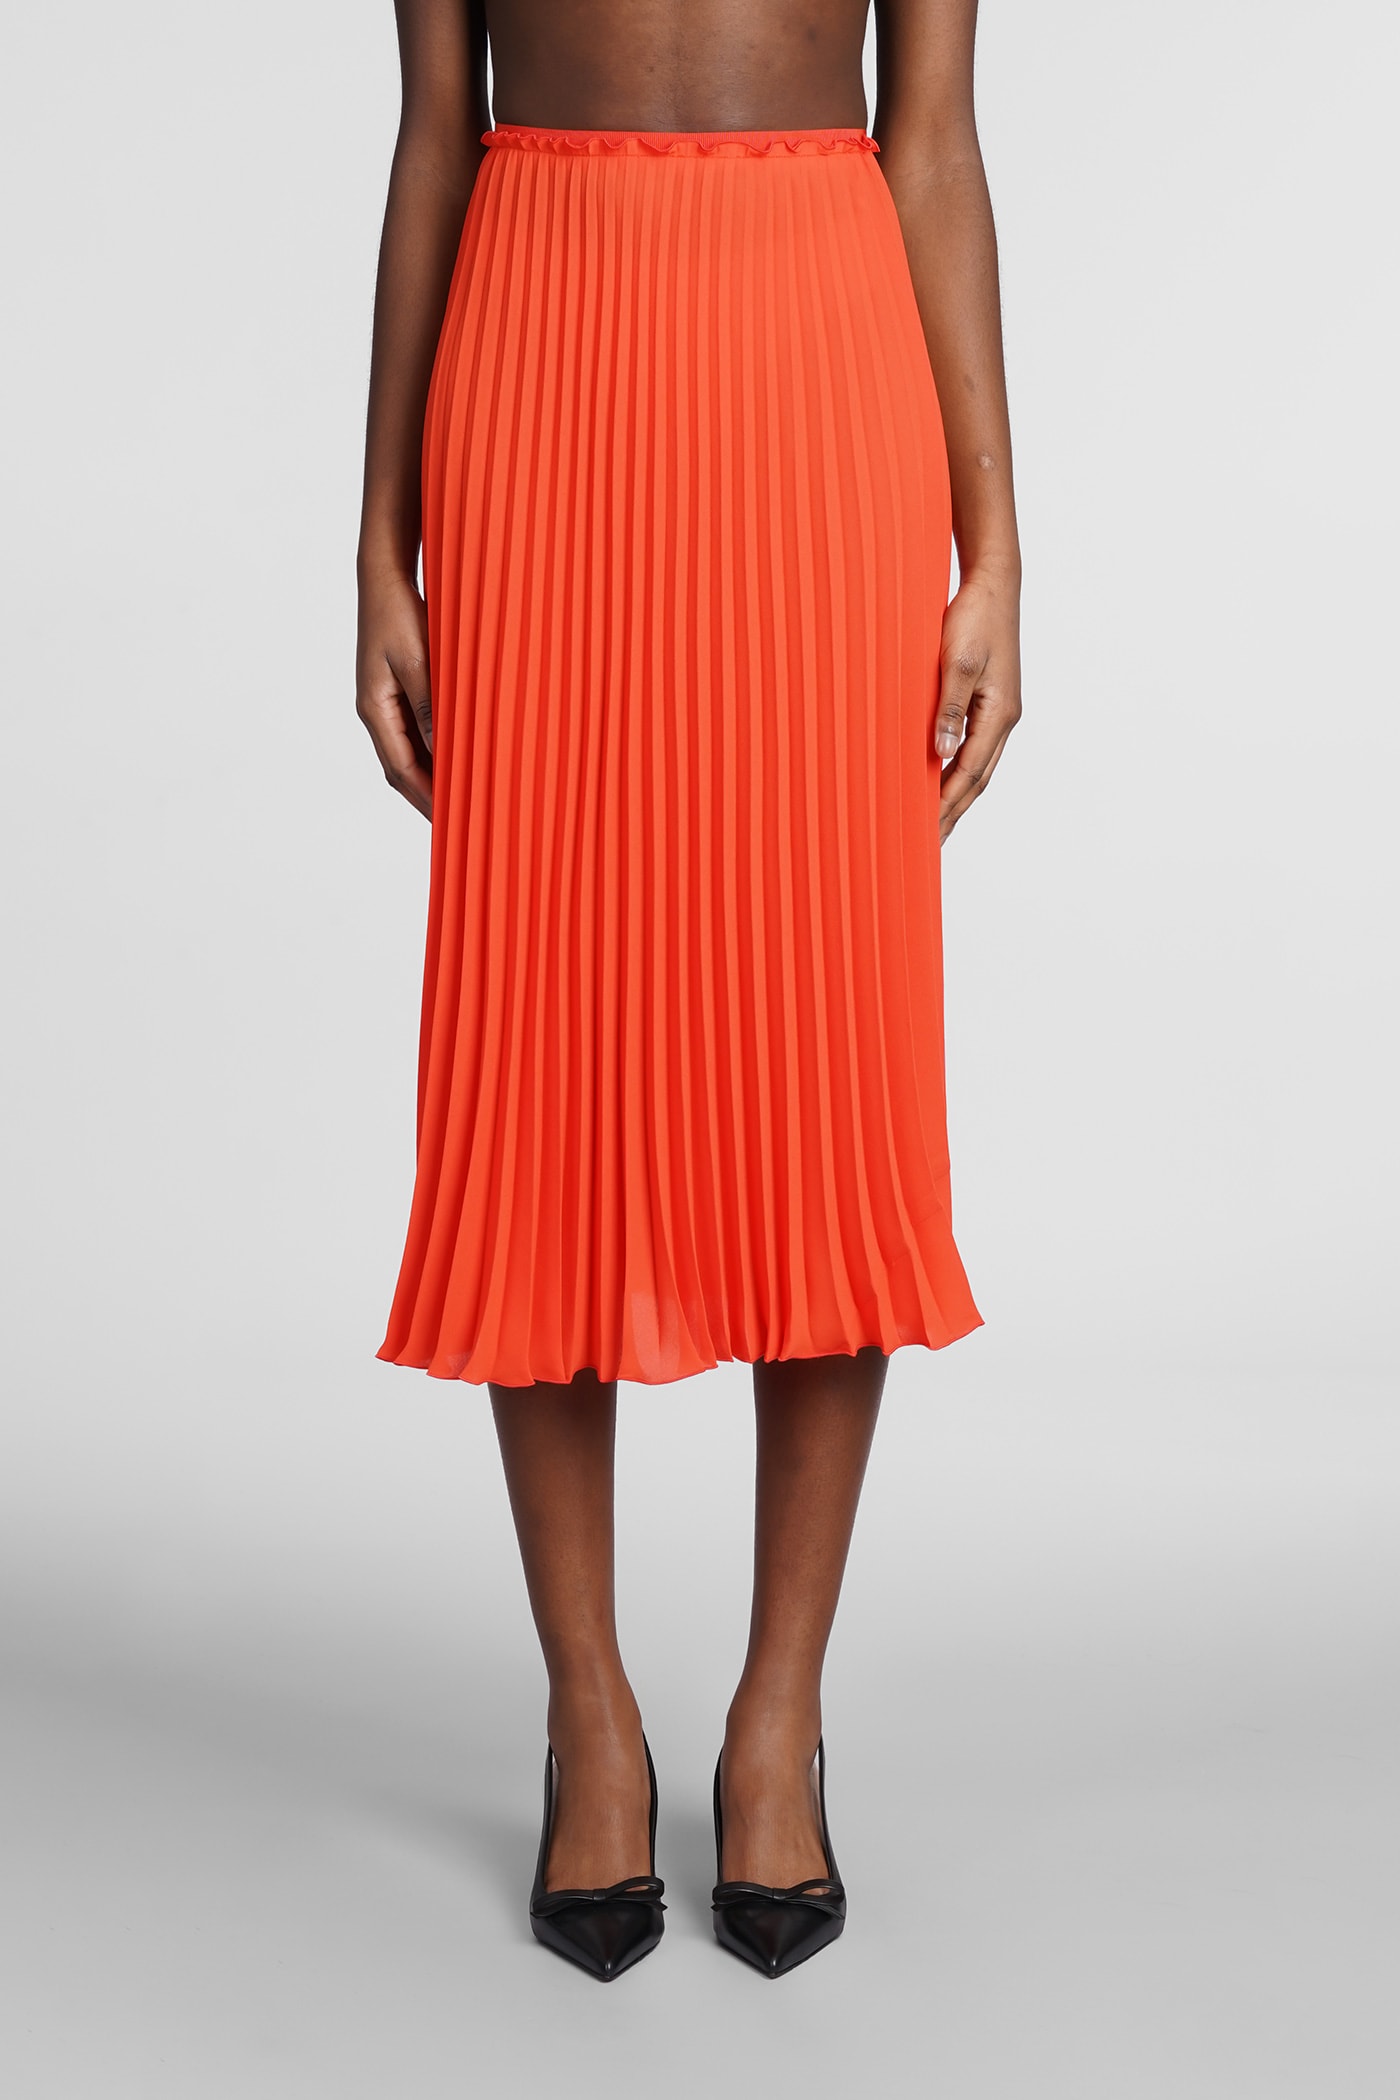 RED VALENTINO SKIRT IN ORANGE SYNTHETIC FIBERS